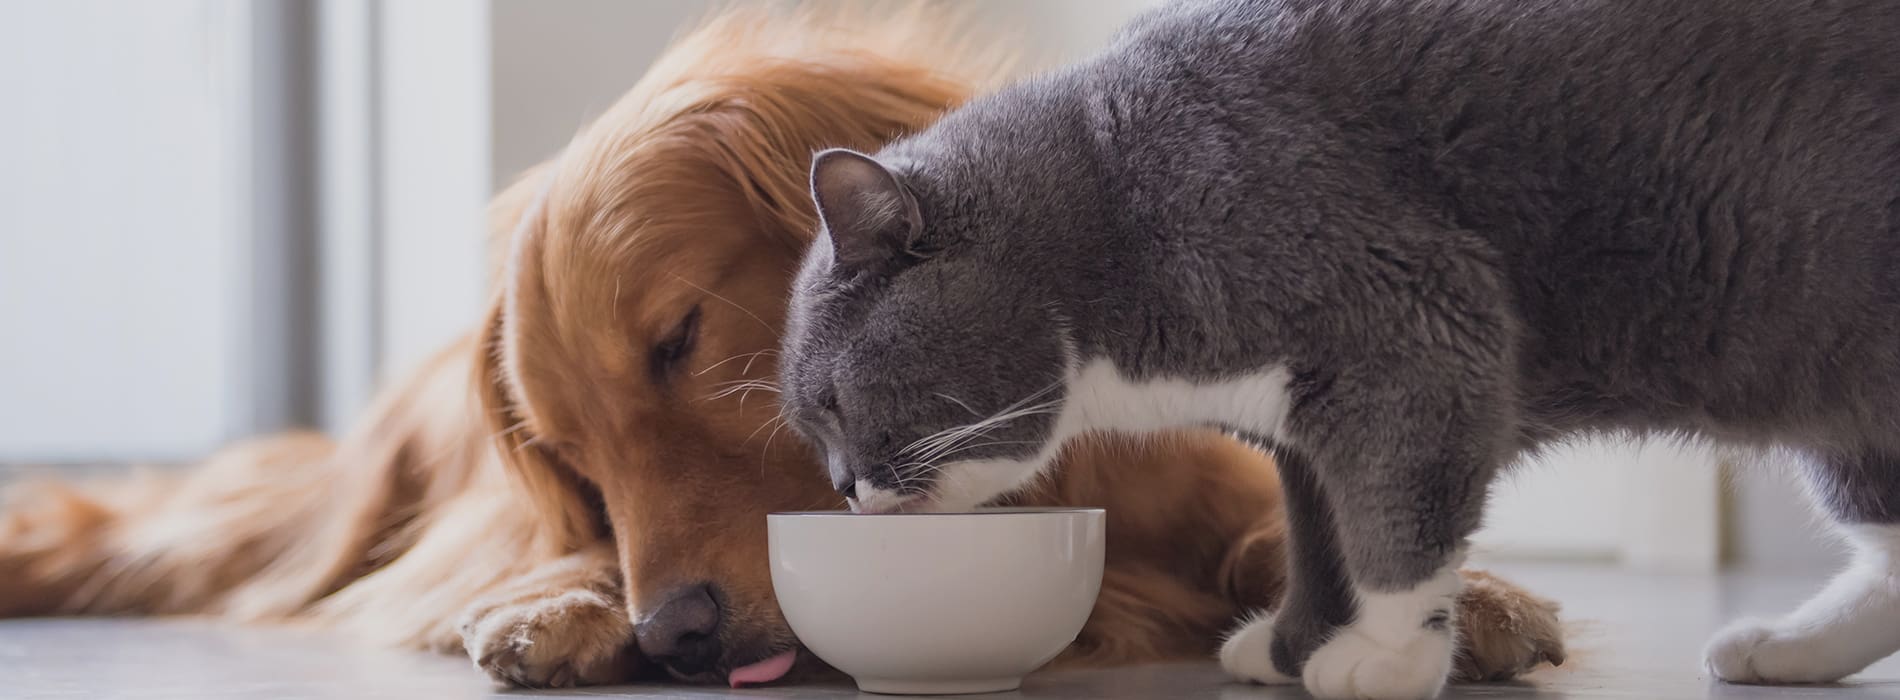 Cat and dog eating from the same bowl